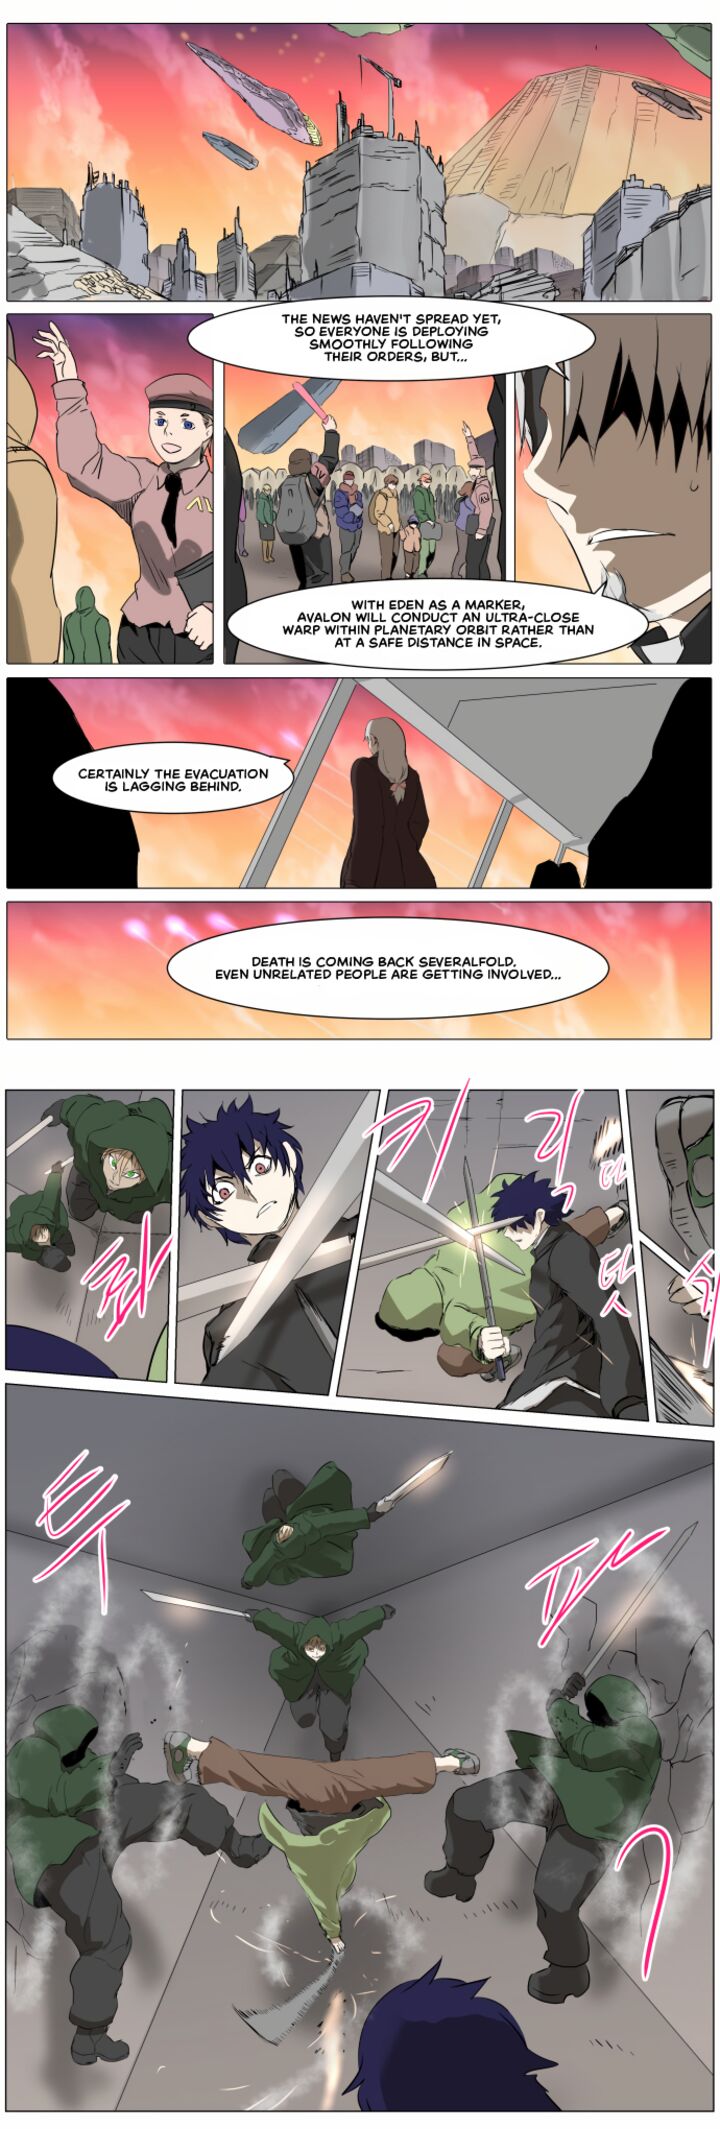 Knight Run Chapter 268 Page 9